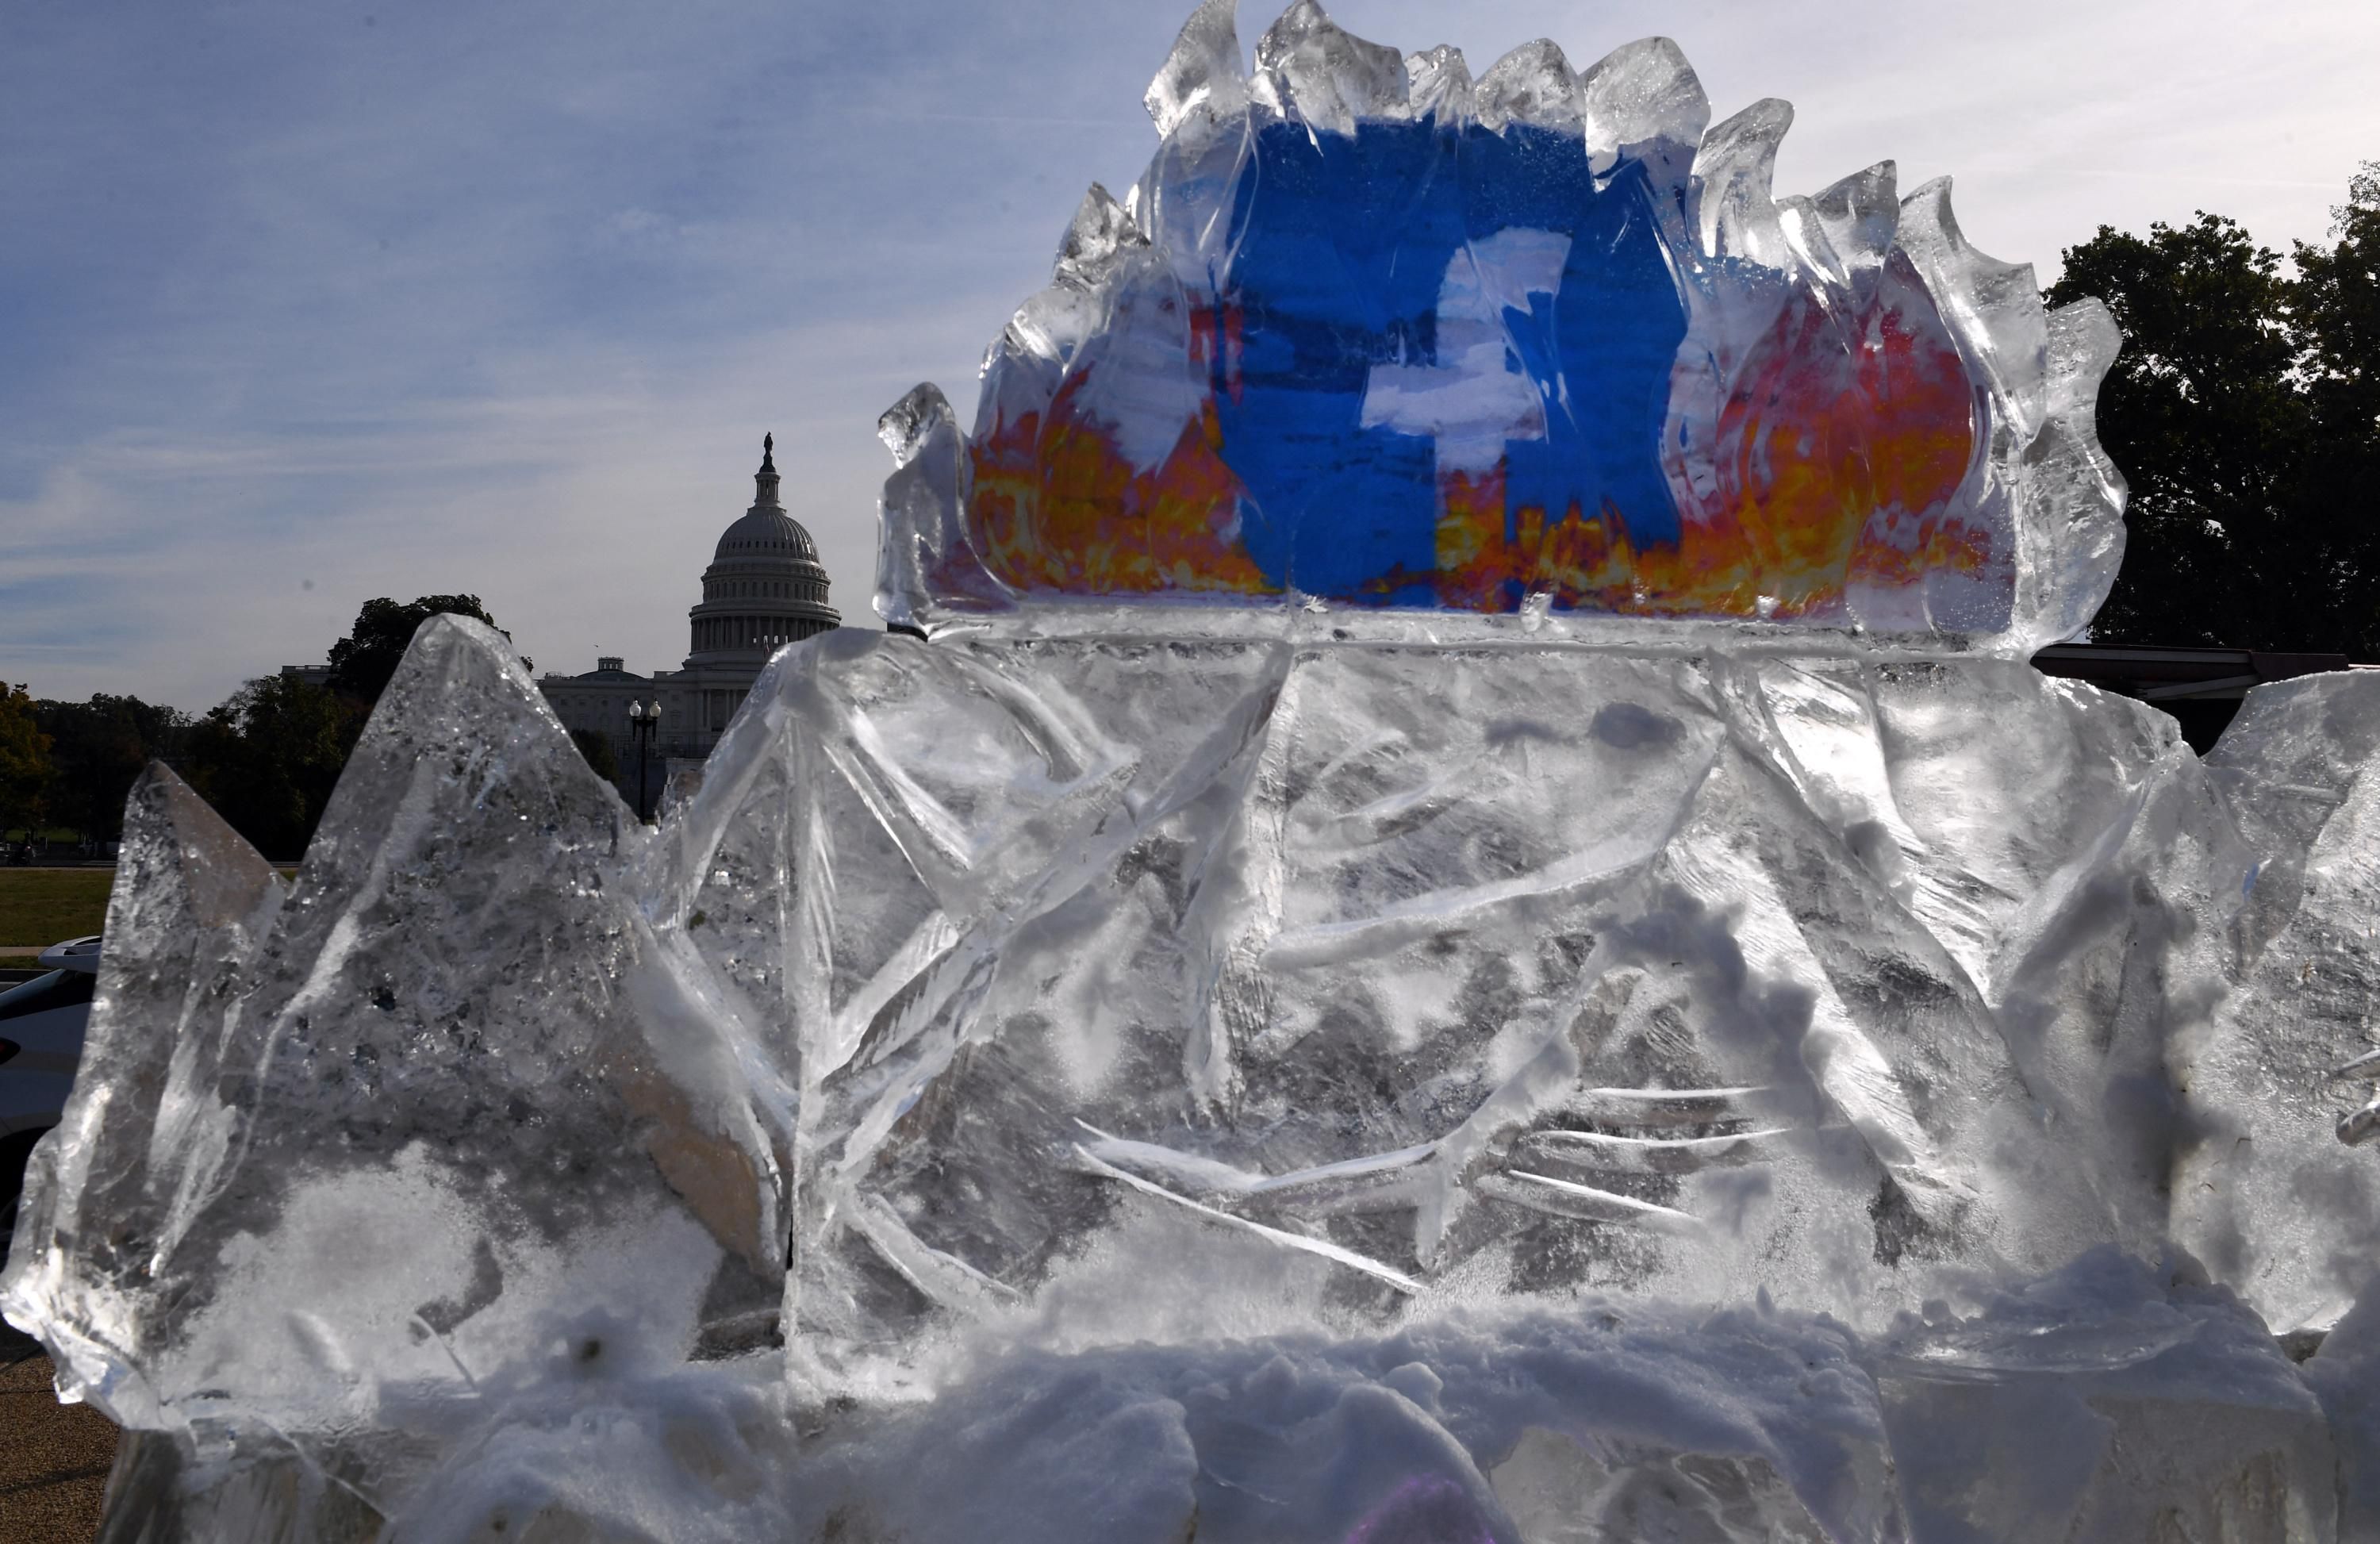 Climate activists display a burning Facebook logo in a melting block of ice